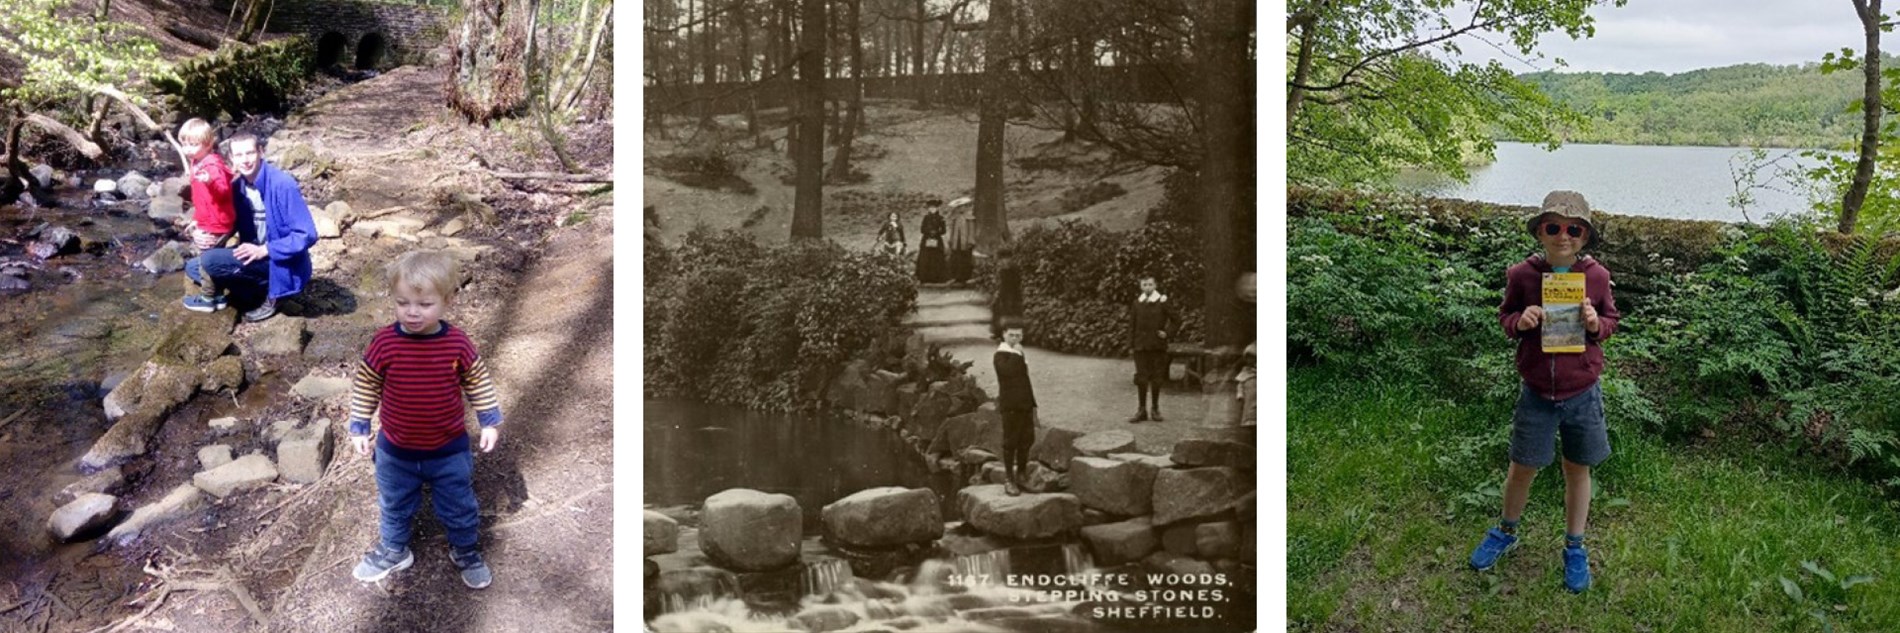 A collage of three images: 1) an adult and two small children pose in the sunshine by a brook, 2) a historic photo taken at the stepping stones in Ecclesall woods - in the foreground two older children stand on and by the stones, in the background a child and two adults all wearing long dresses stand on the path behind them., 3) a child in in a hat and sunglasses holds a map stood in front of a stone wall, which is in front of a lake or reservoir.